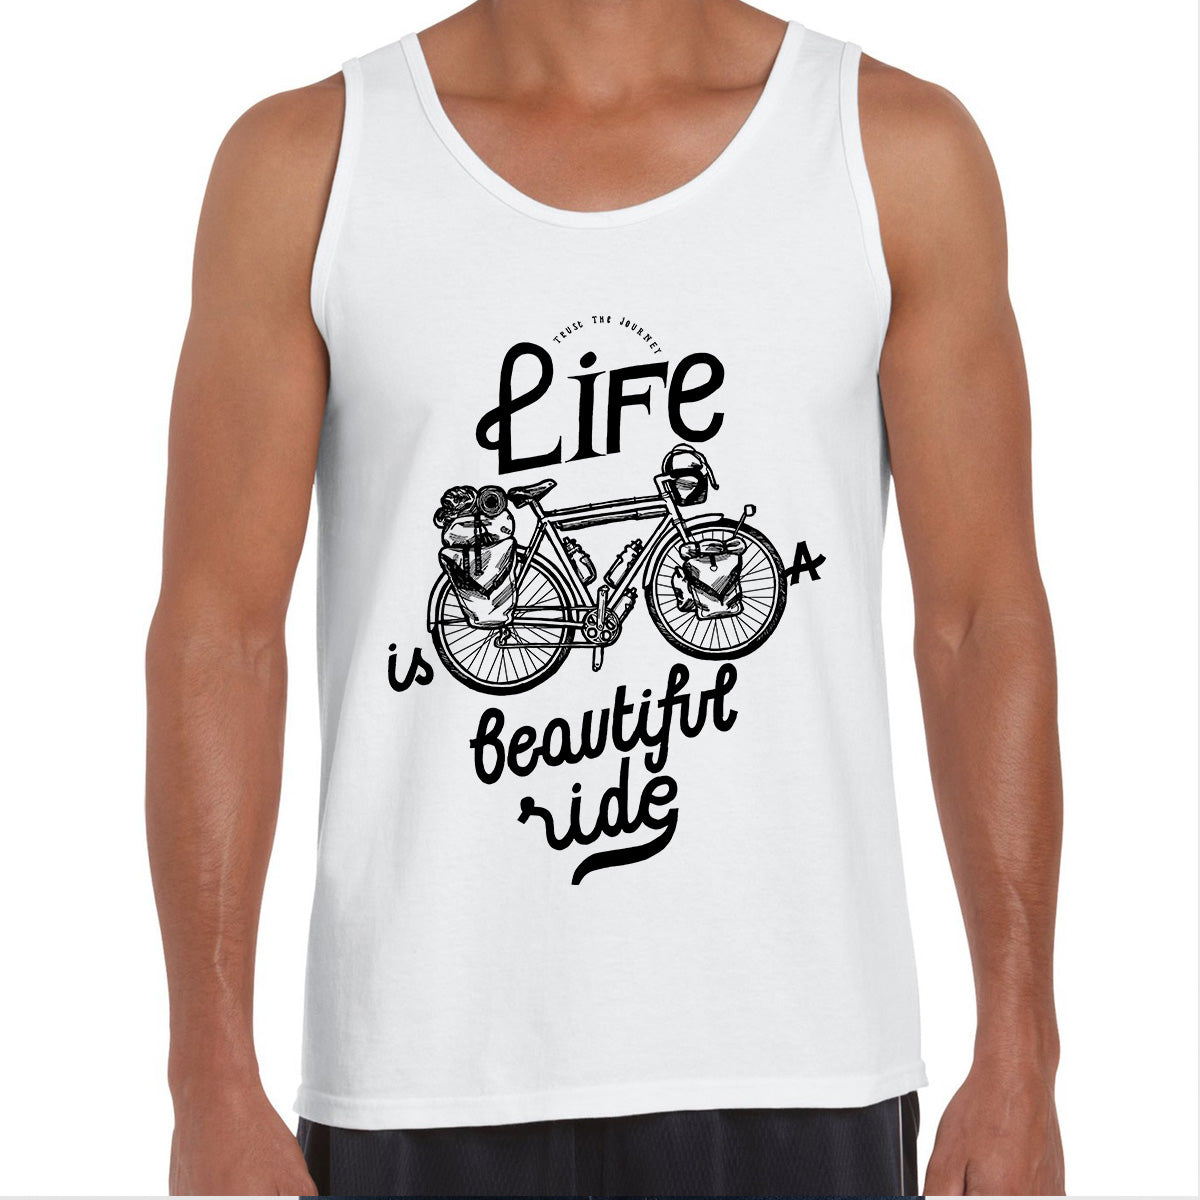 Life is a beautiful ride-Special Tank Top for Bicycle and Hipster minds - Kuzi Tees